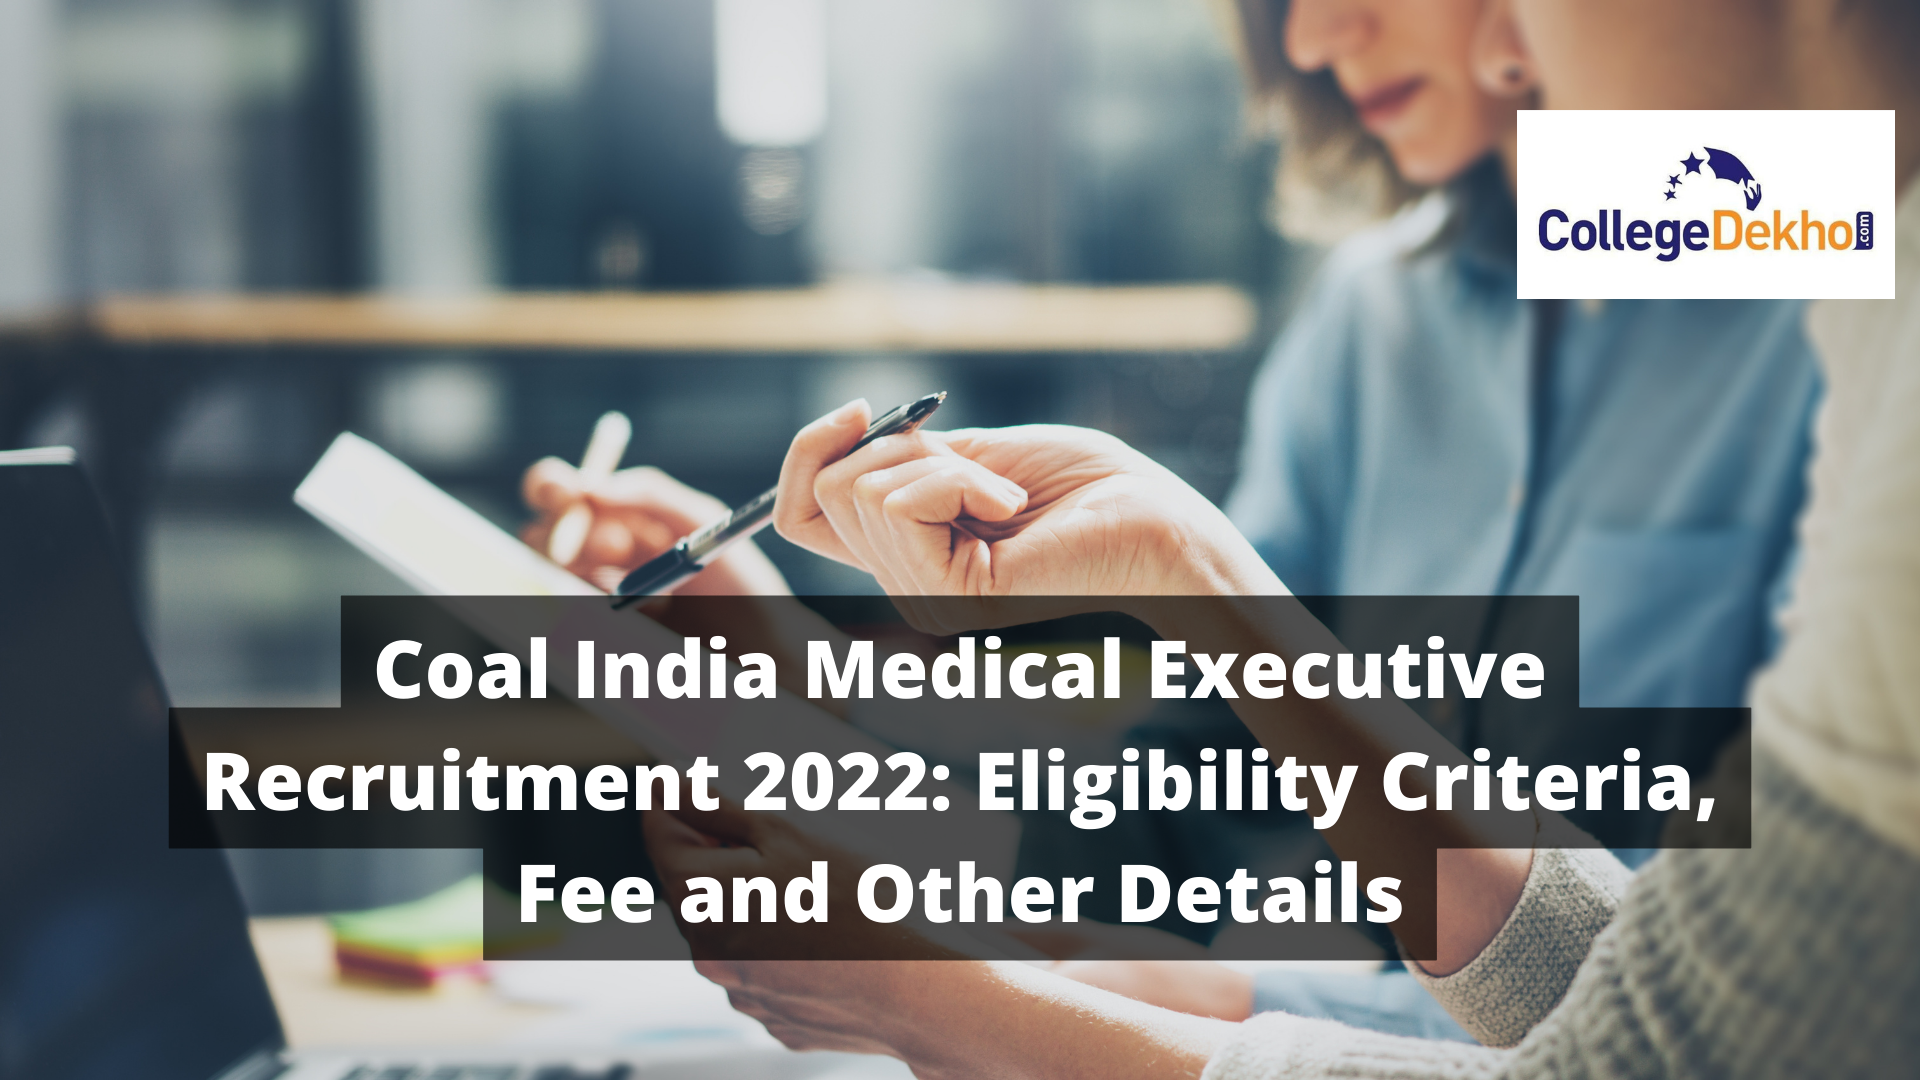 Coal India Medical Executive Recruitment 2022: Eligibility Criteria, Fee and Other Details